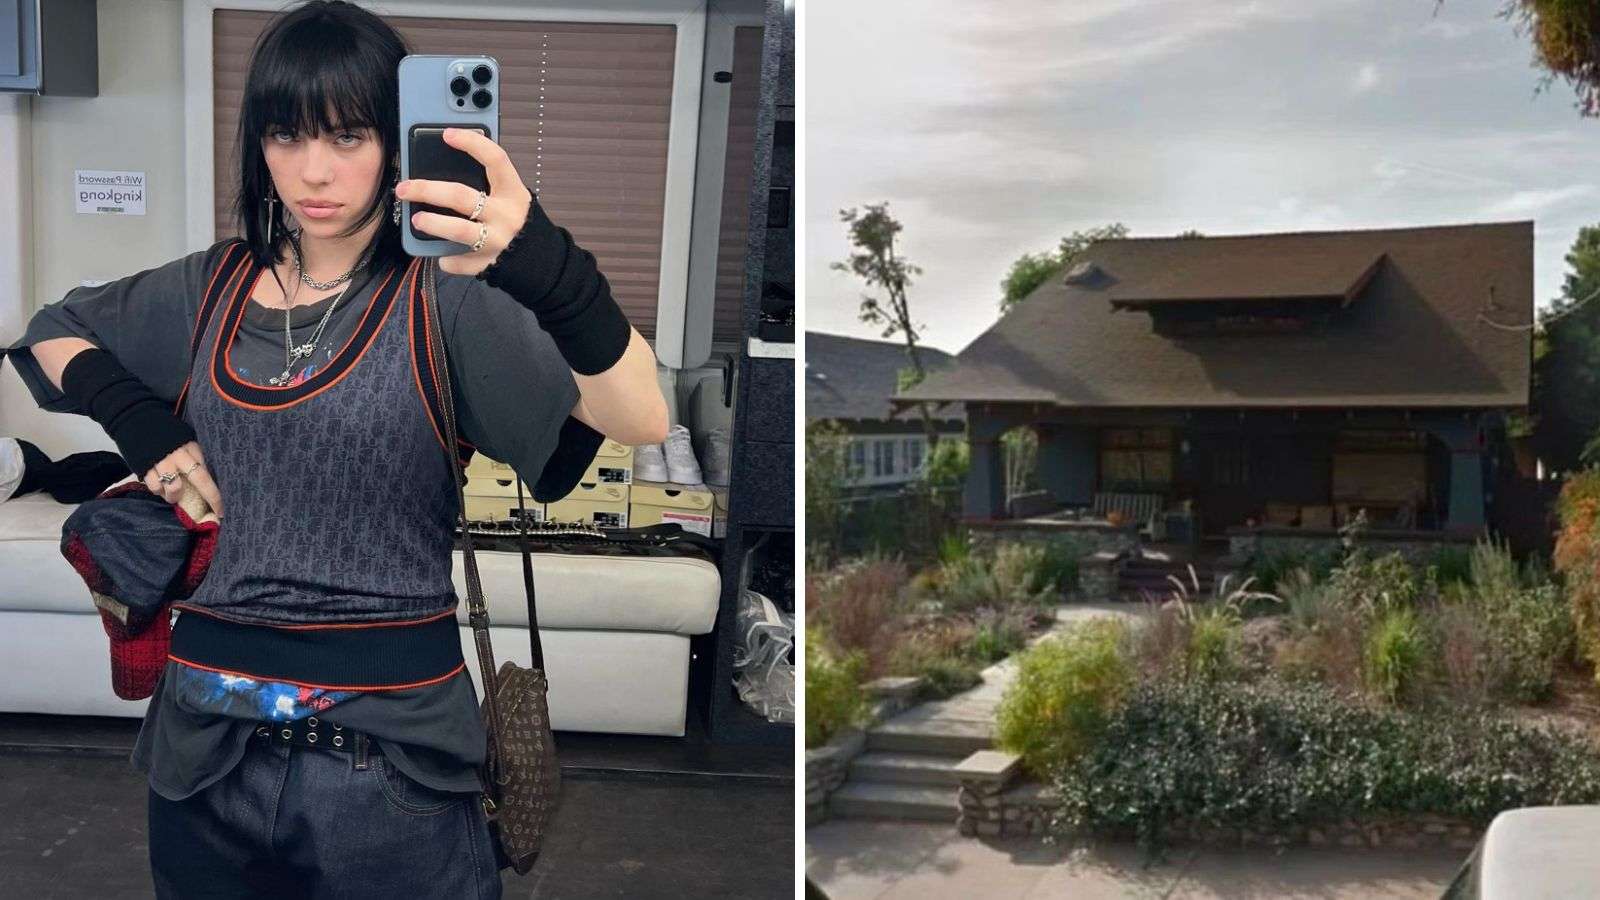 Man arrested after trying to break into Billie Eilish's Highland Park home